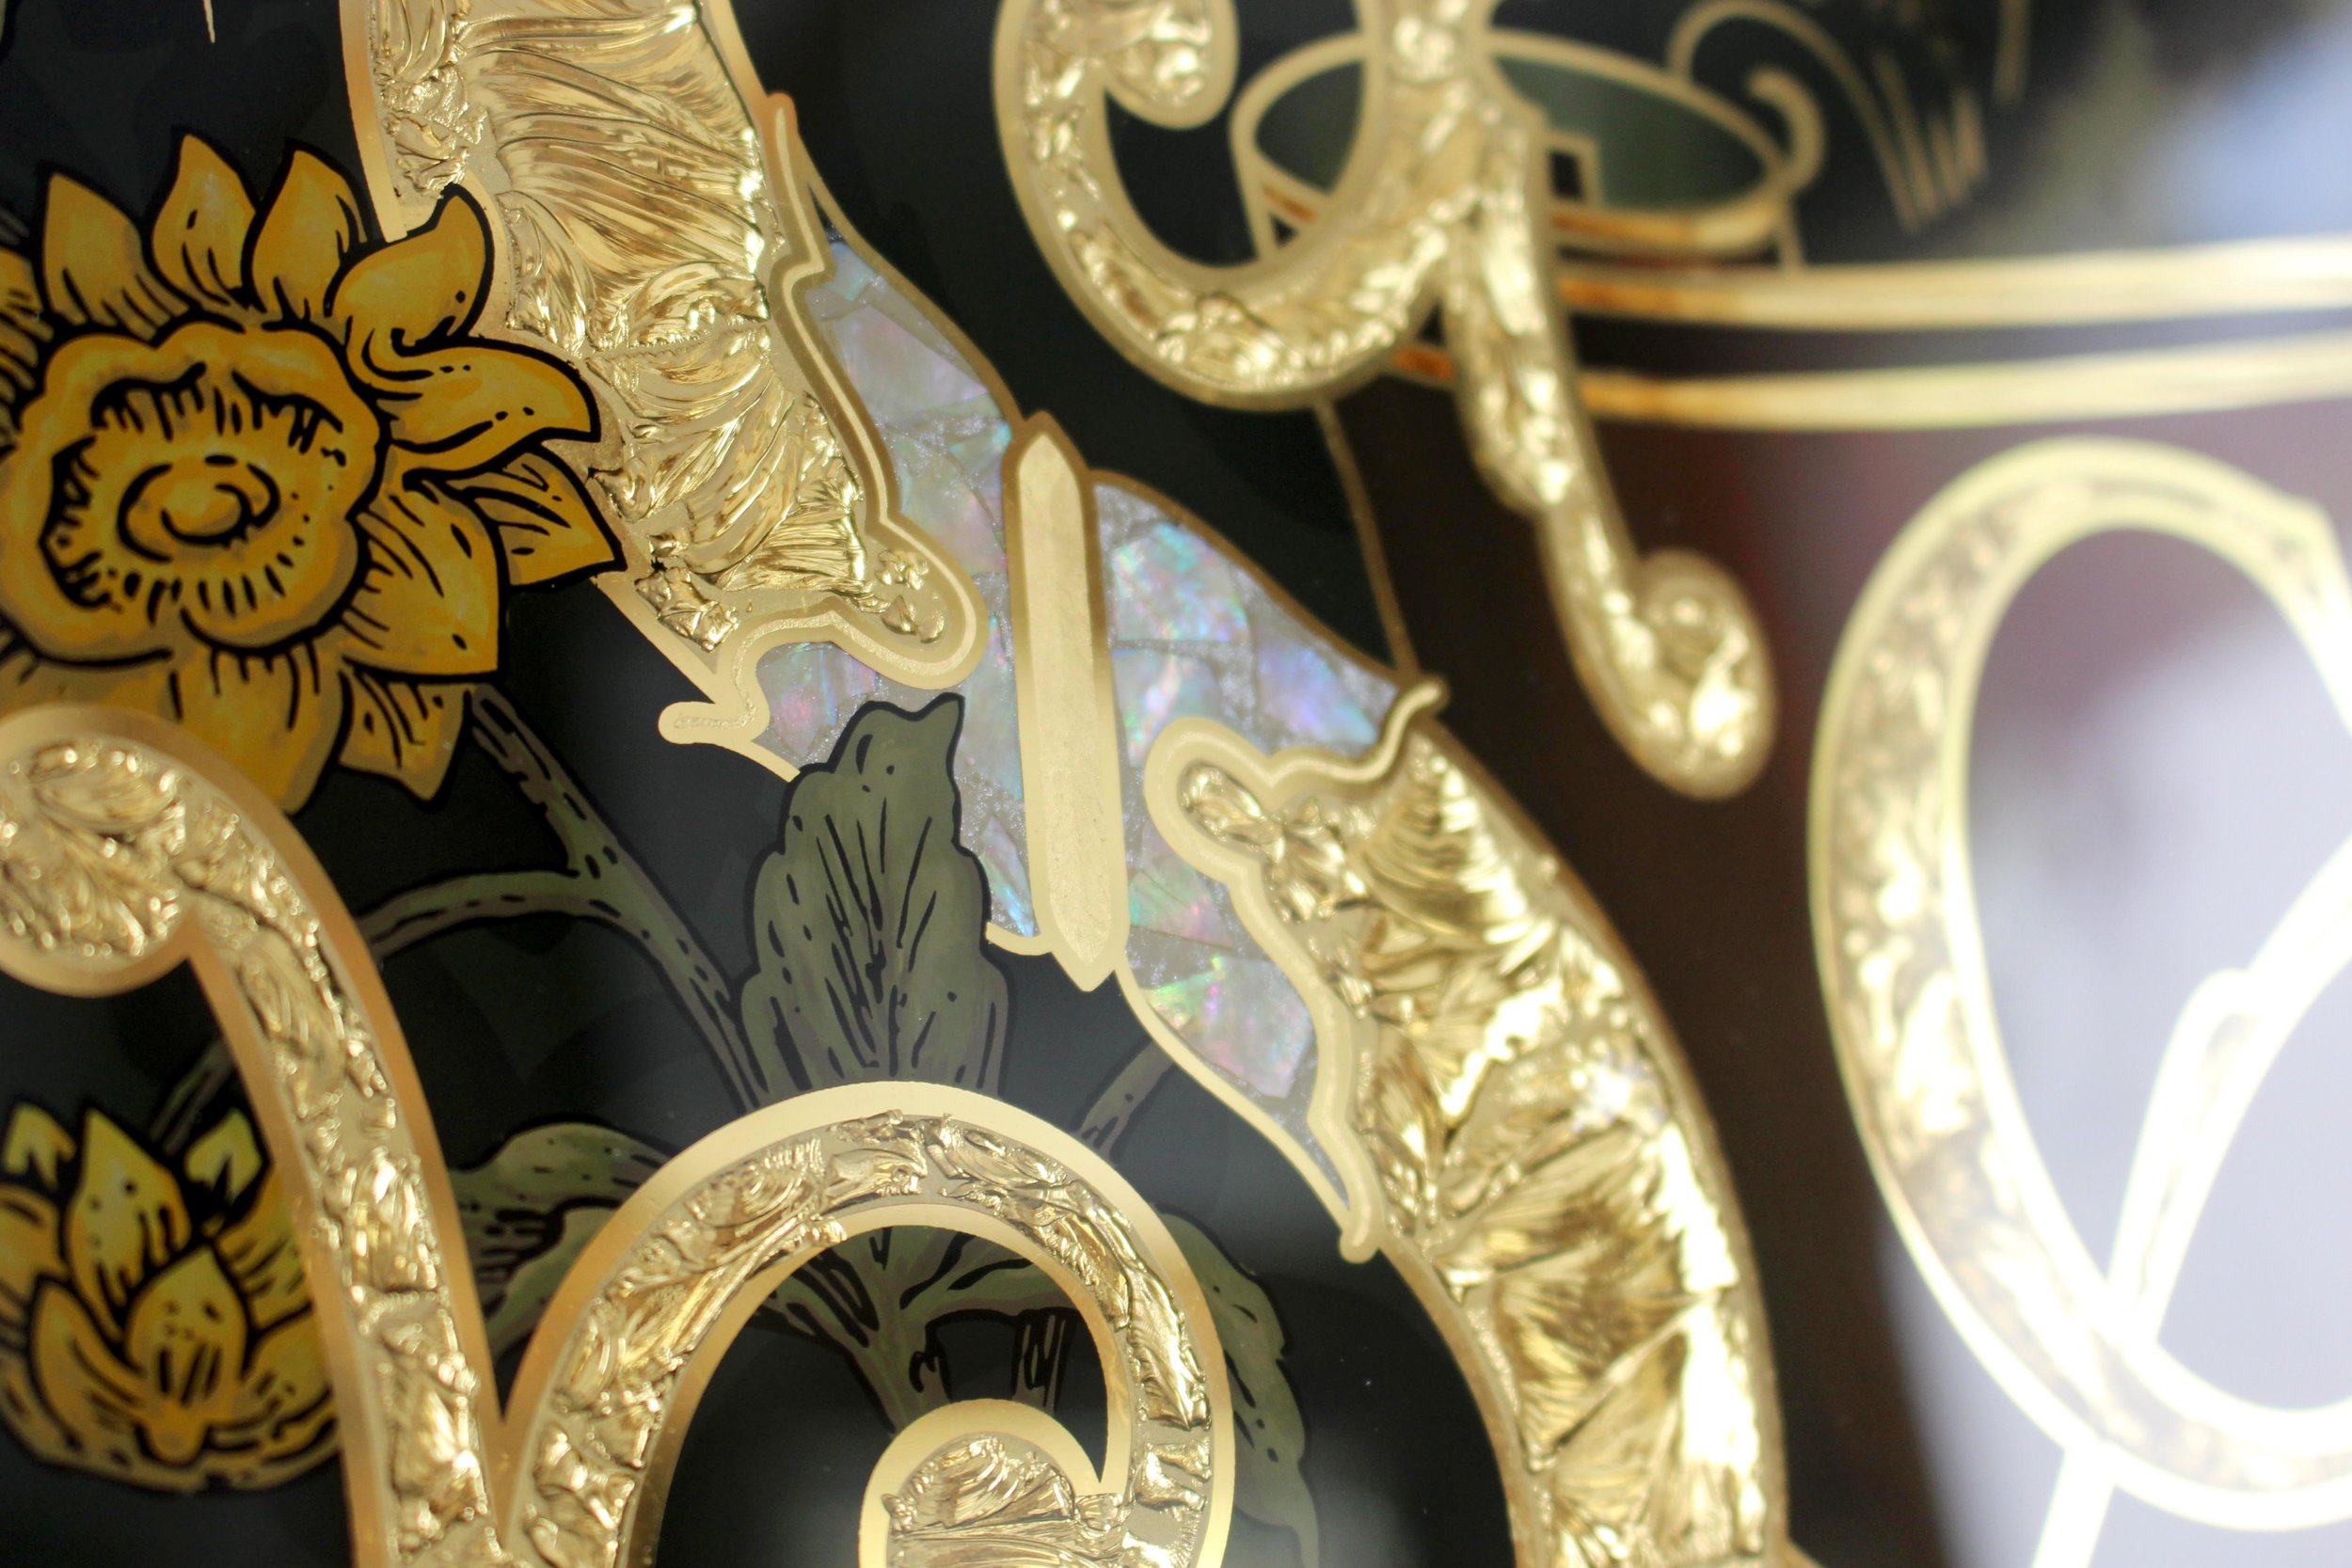  Gold leaf glue chipped glass detail with mother of pearl inlay 